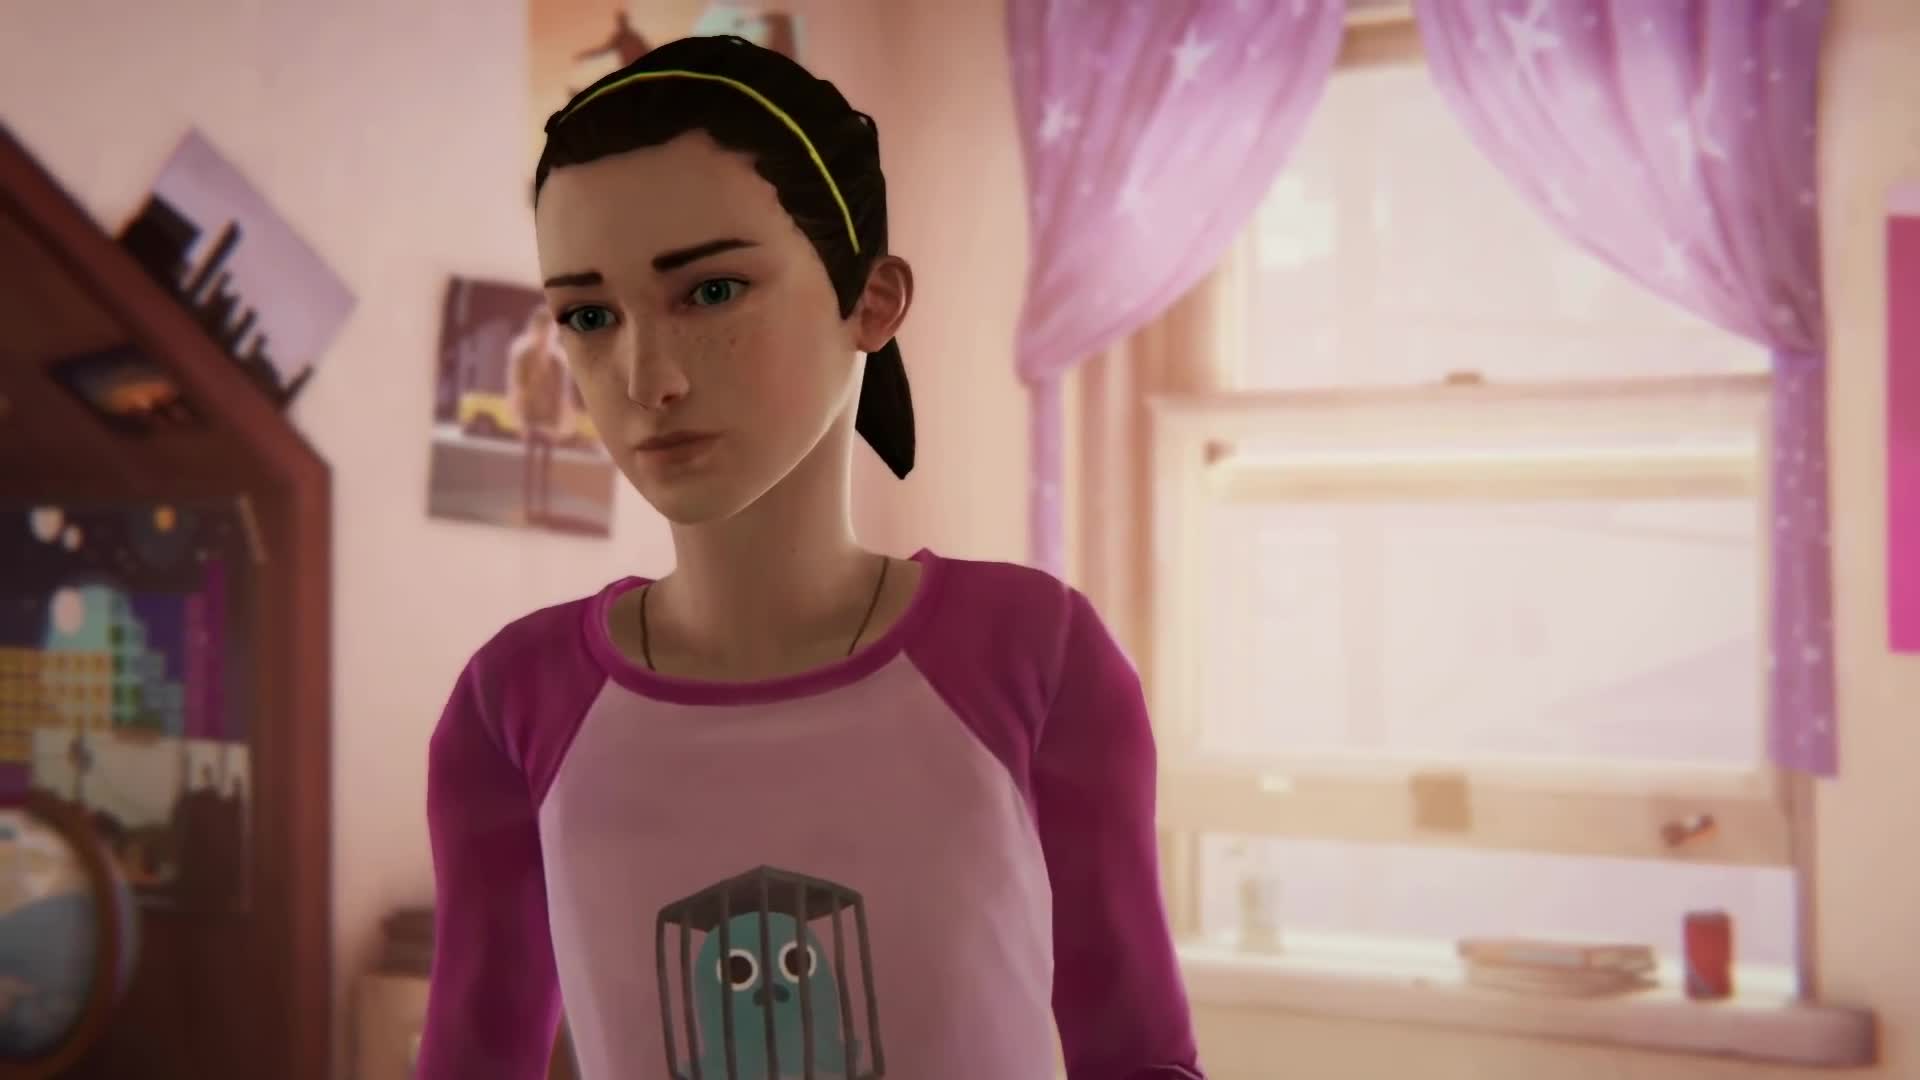 Life is Strange: Before the Storm - Farewell trailer